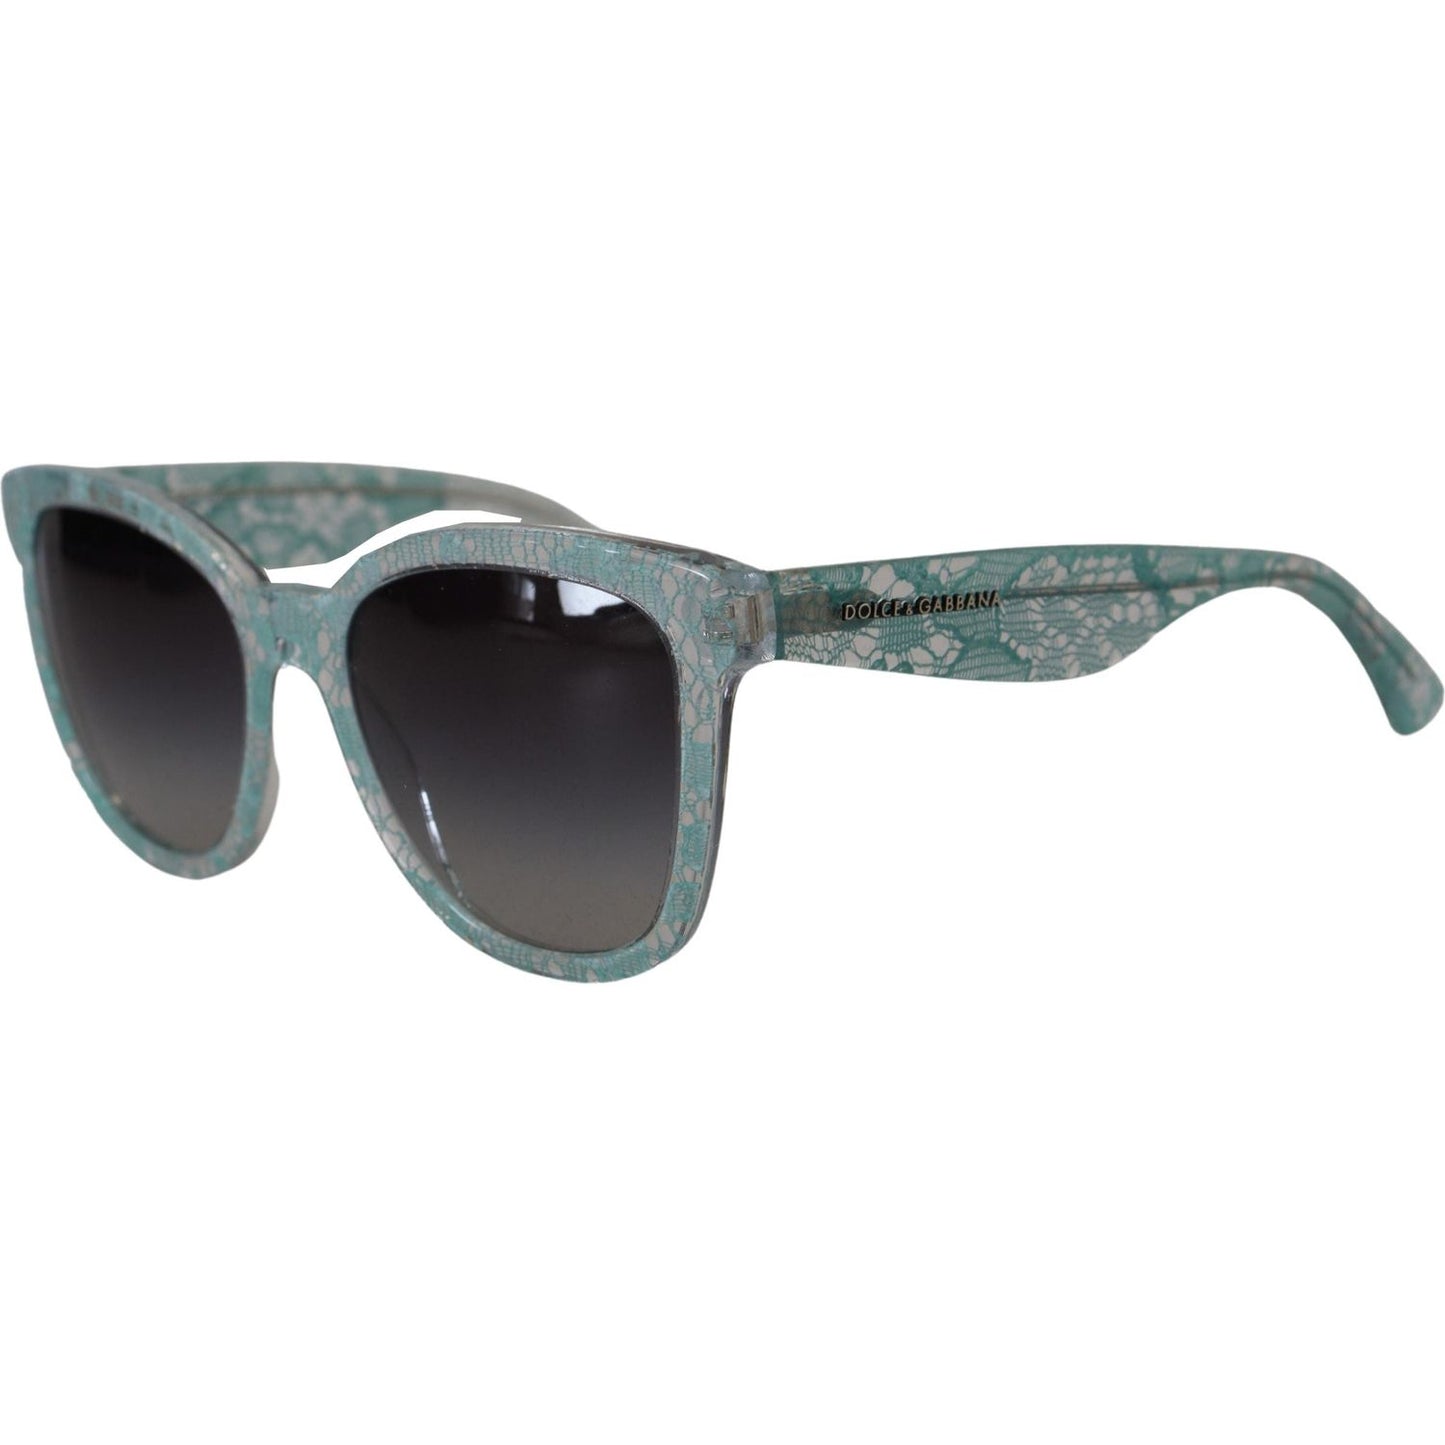 Dolce & Gabbana Sicilian Lace Crystal-Infused Sunglasses blue-lace-crystal-acetate-butterfly-dg4190-sunglasses-1